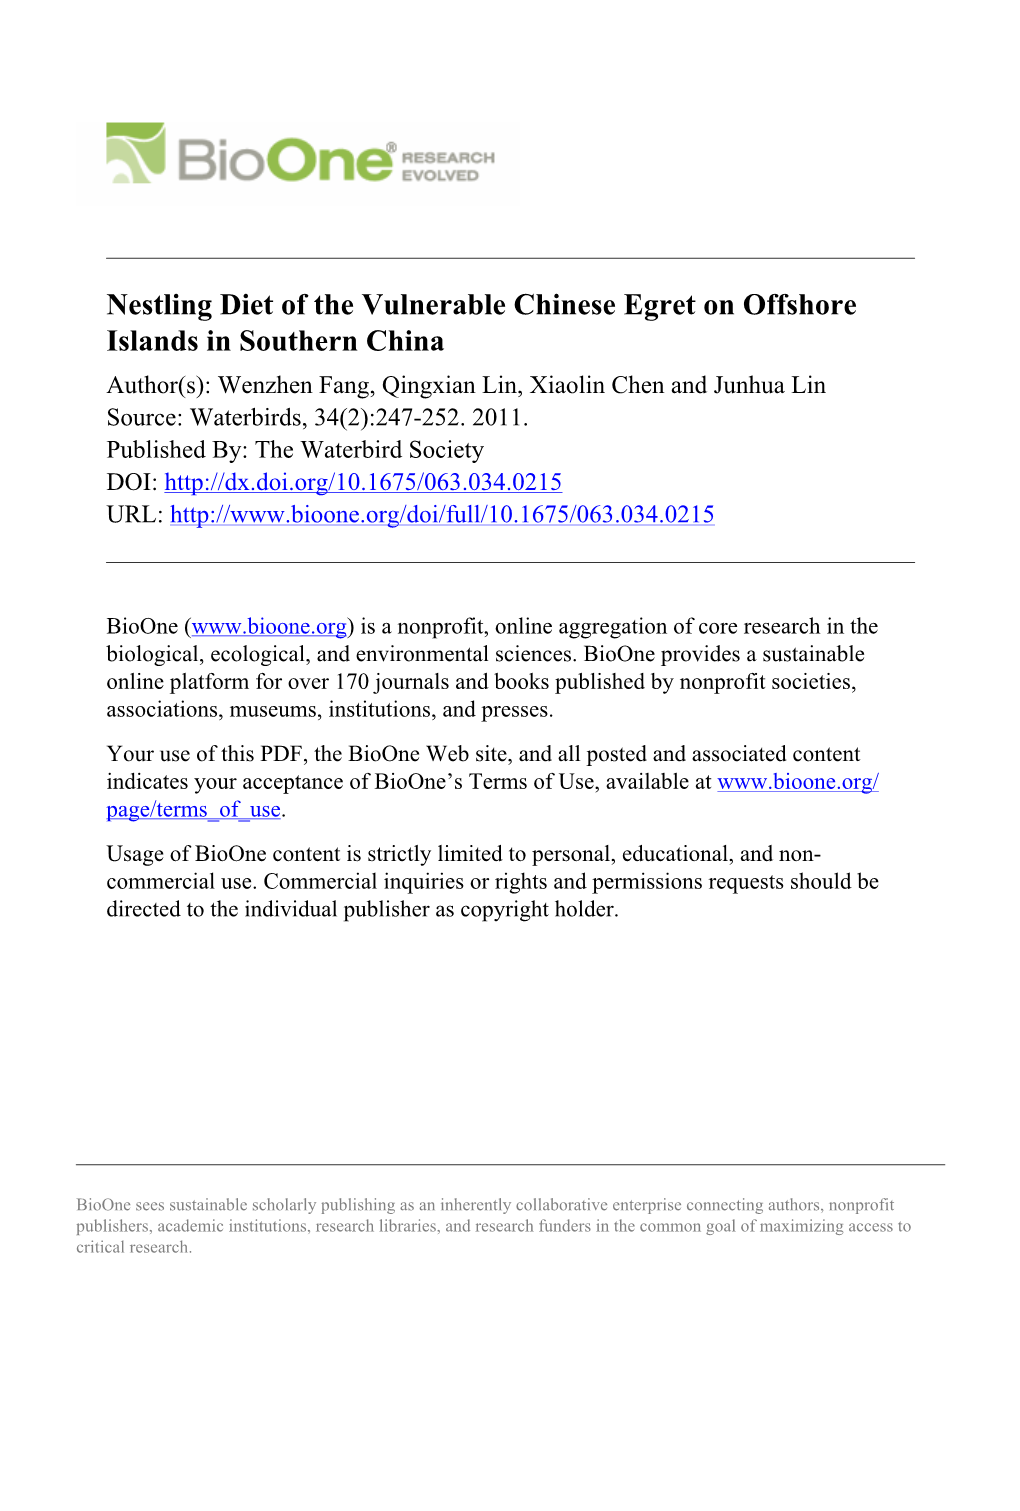 Nestling Diet of the Vulnerable Chinese Egret on Offshore Islands